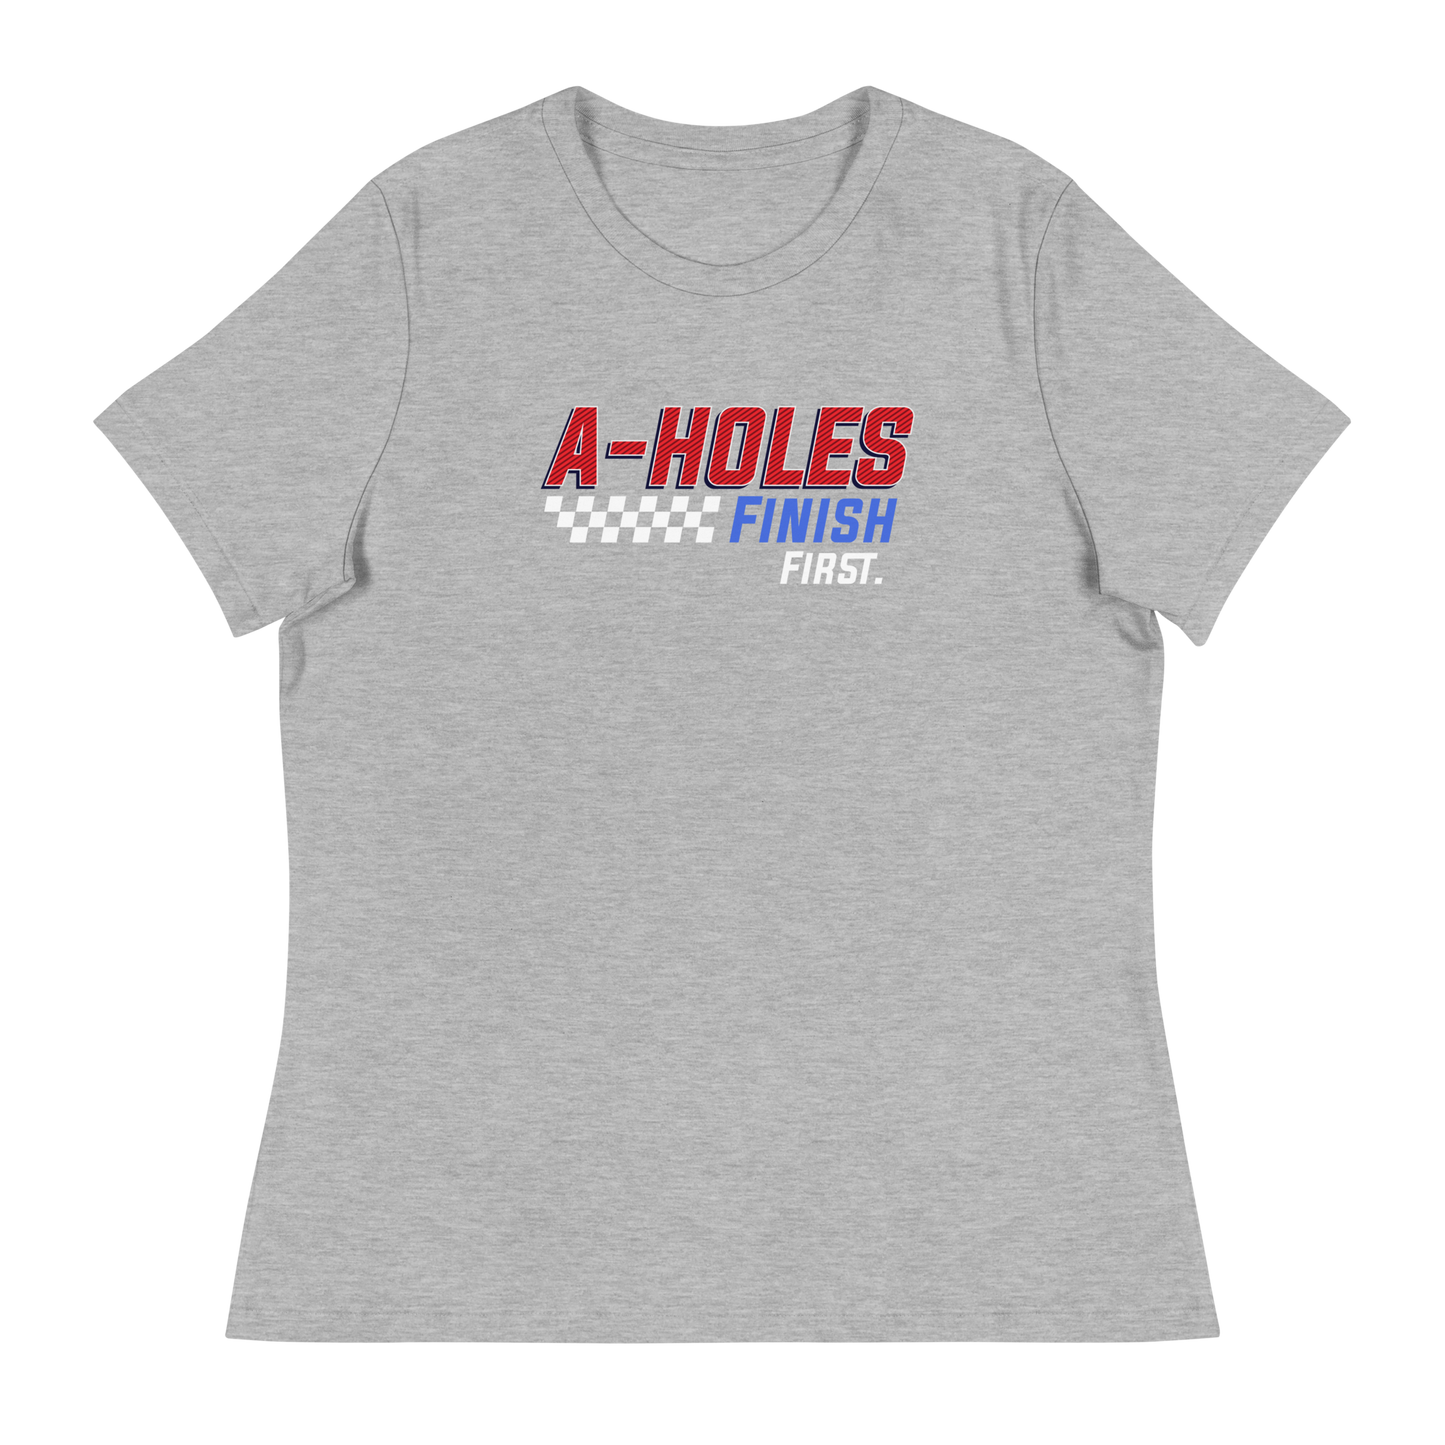 A-Hole "First Place" Women's Relaxed T-Shirt